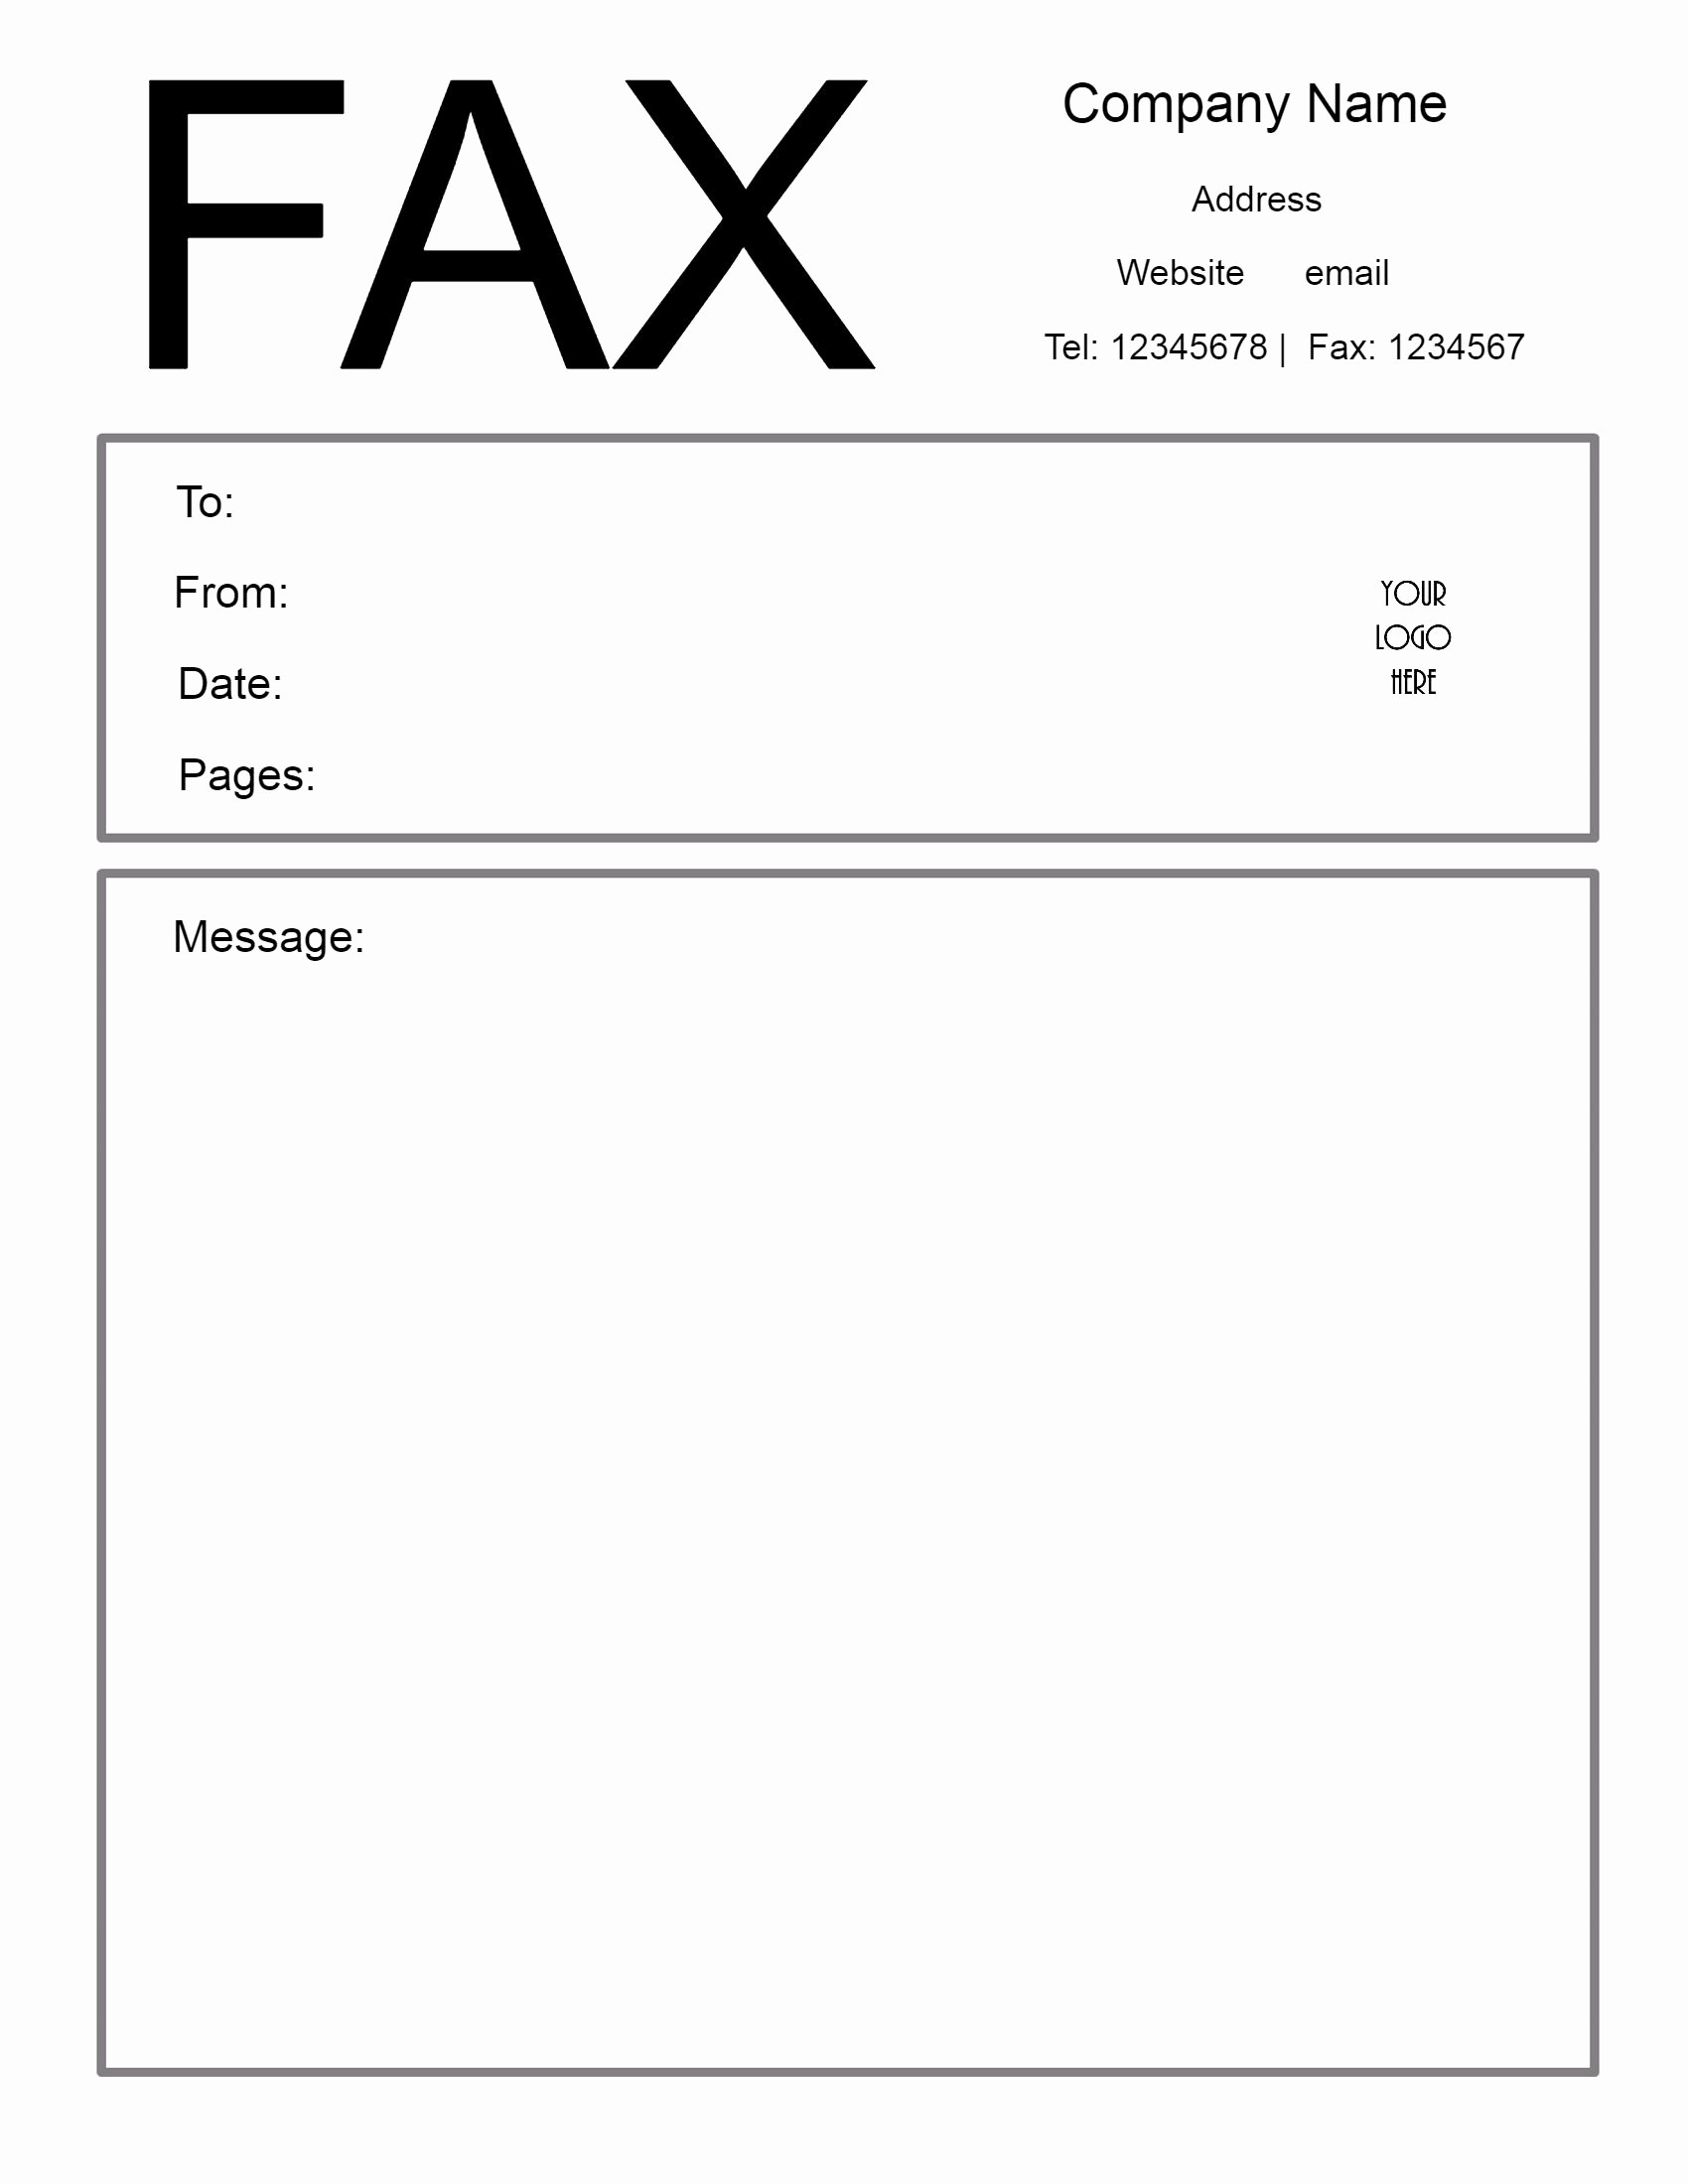 Fax Cover Sheet Pdf Free New Free Fax Cover Sheet Template